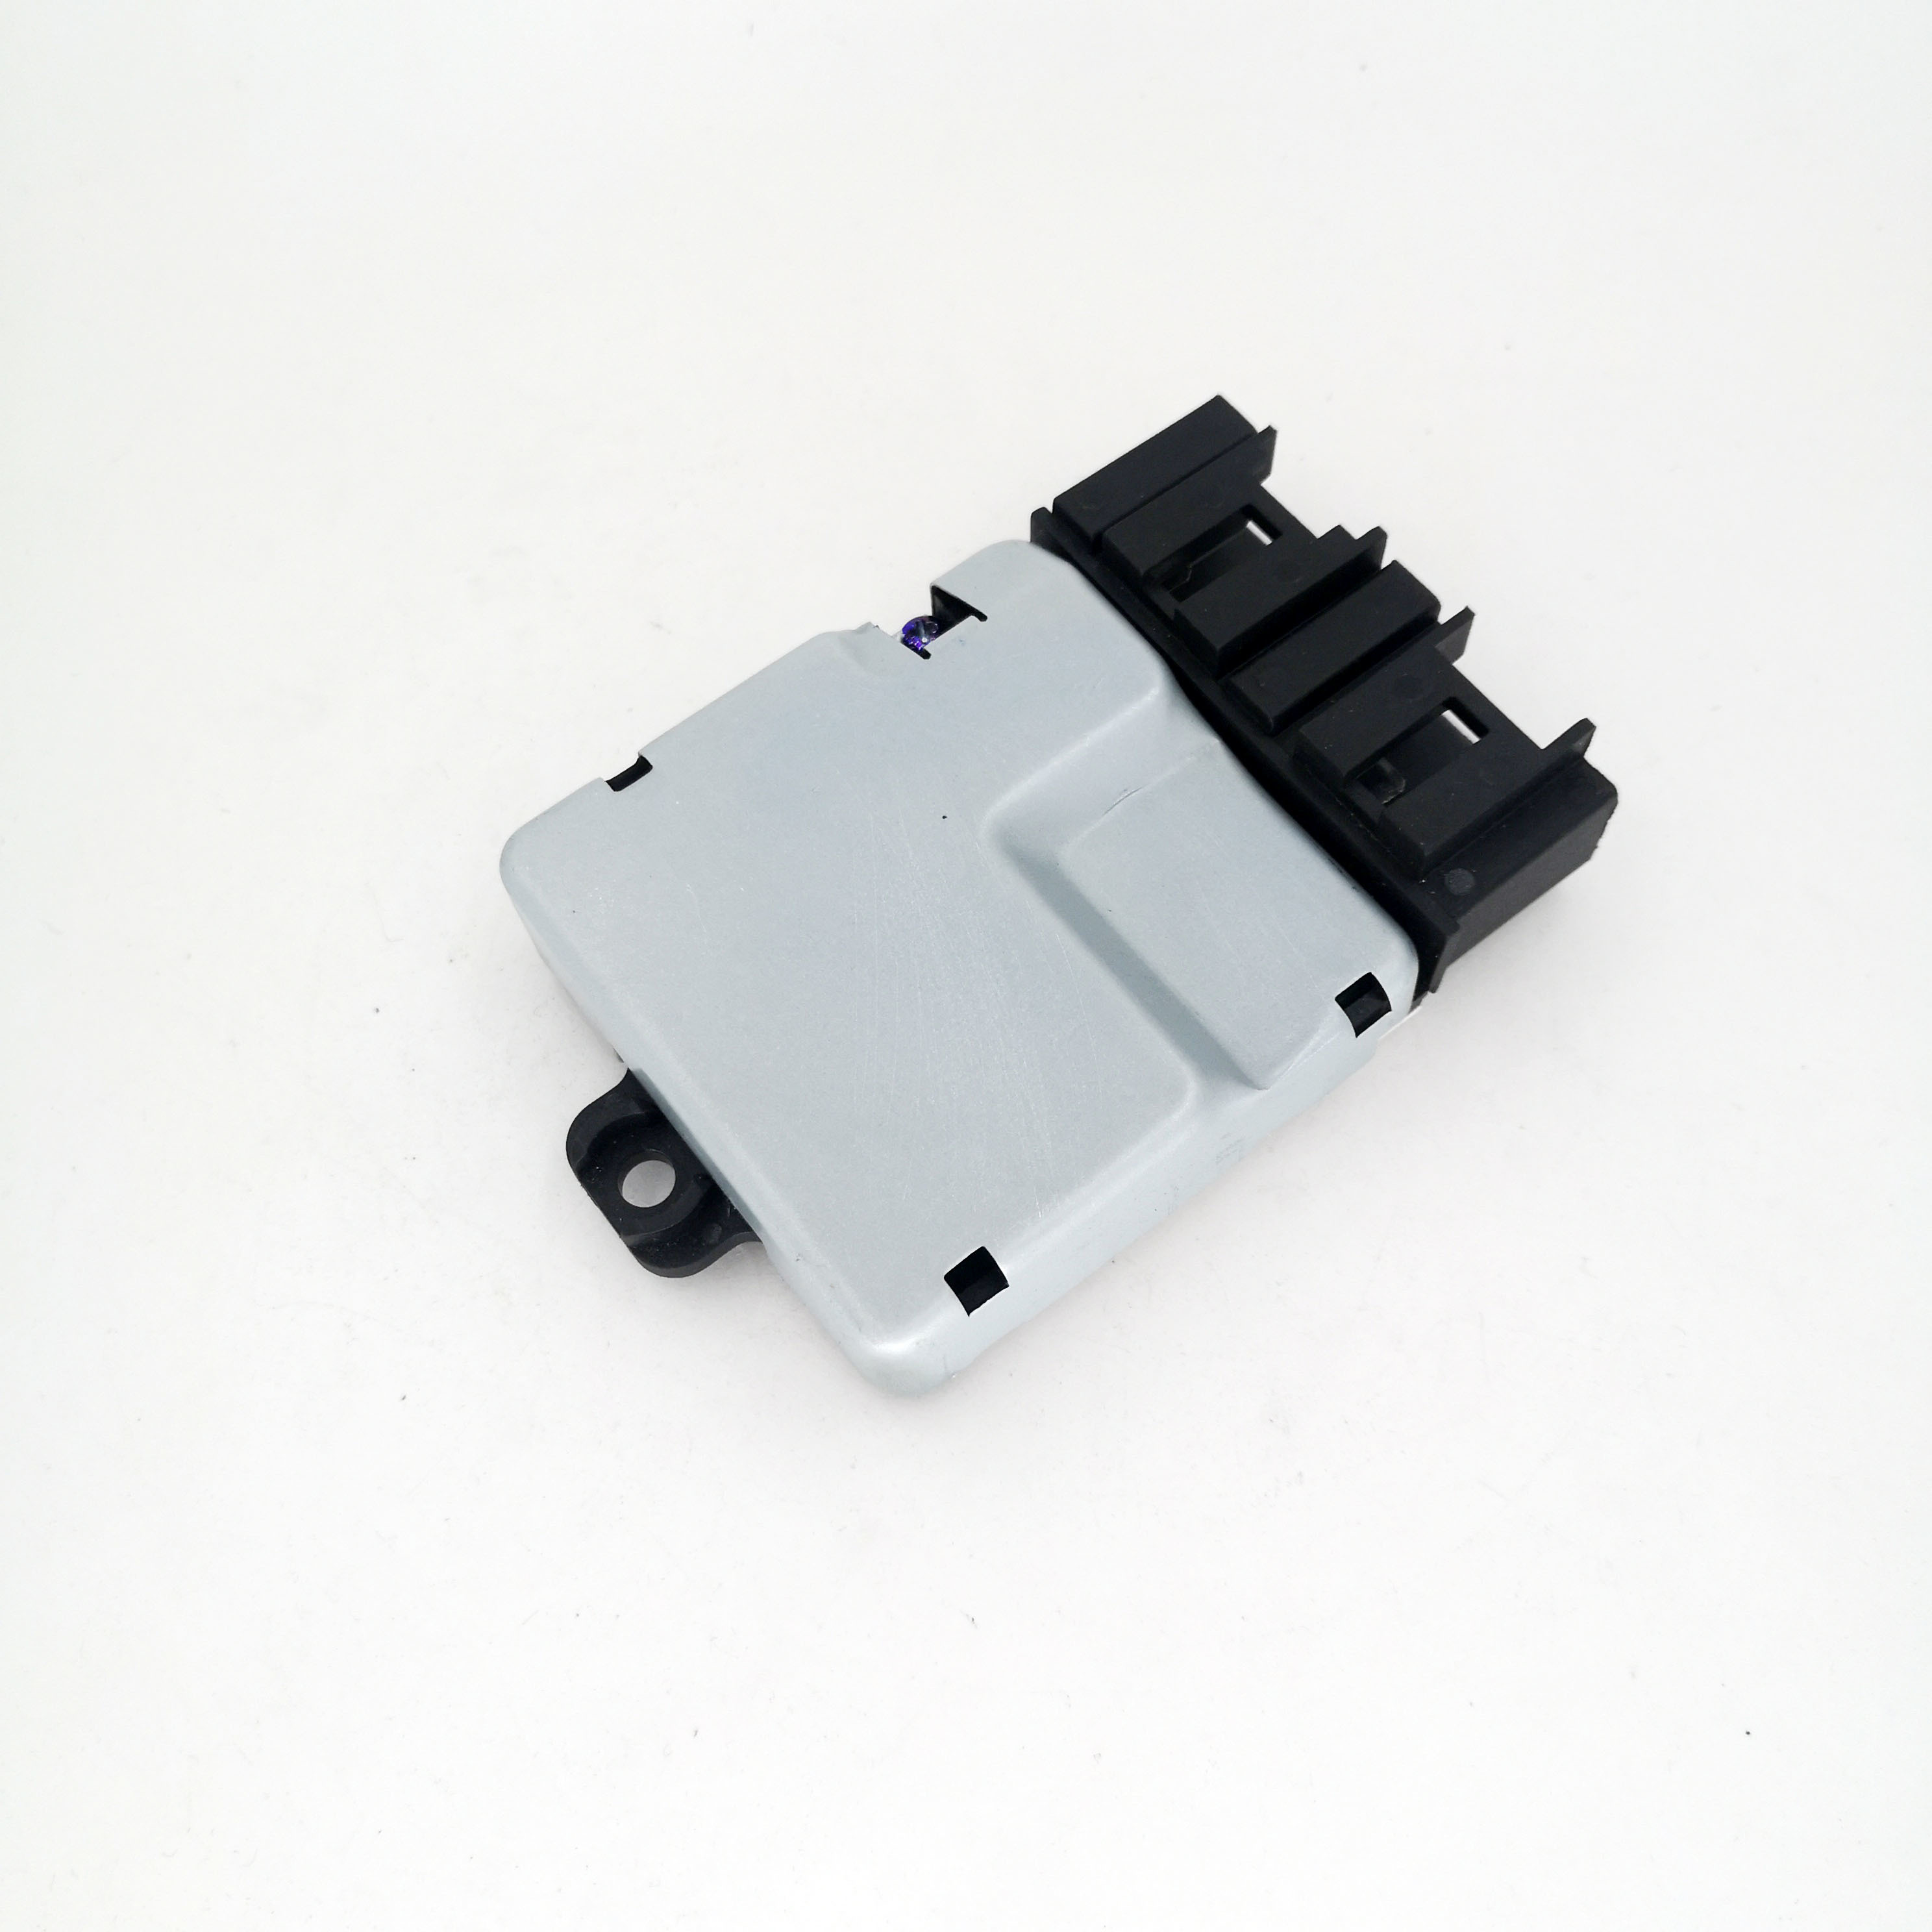 Cooling Fan Controller for Toyota Lexus 499300-1071 499300-1061 87165-22050 87165-22040